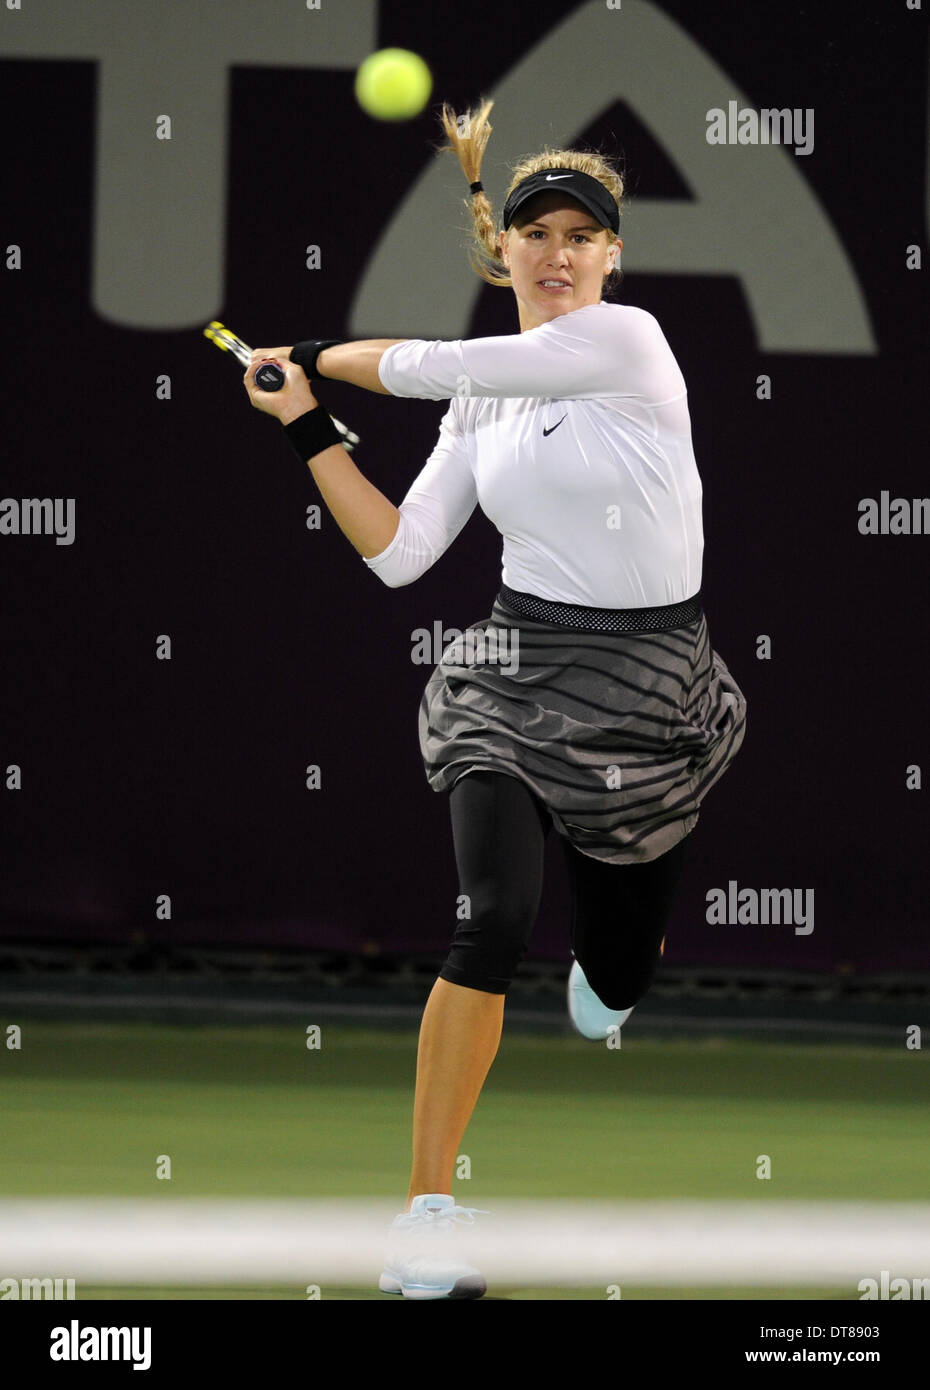 Doha. 11th Feb, 2014. Eugenie Bouchard of Canada hits a return during her women's singles match against Bethanie Mattek-Sands of United States at the Qatar Open tennis tournament in Doha, Qatar on Feb. 11, 2014. Mattek-Sands won 2-0. Credit:  Chen Shaojin/Xinhua/Alamy Live News Stock Photo